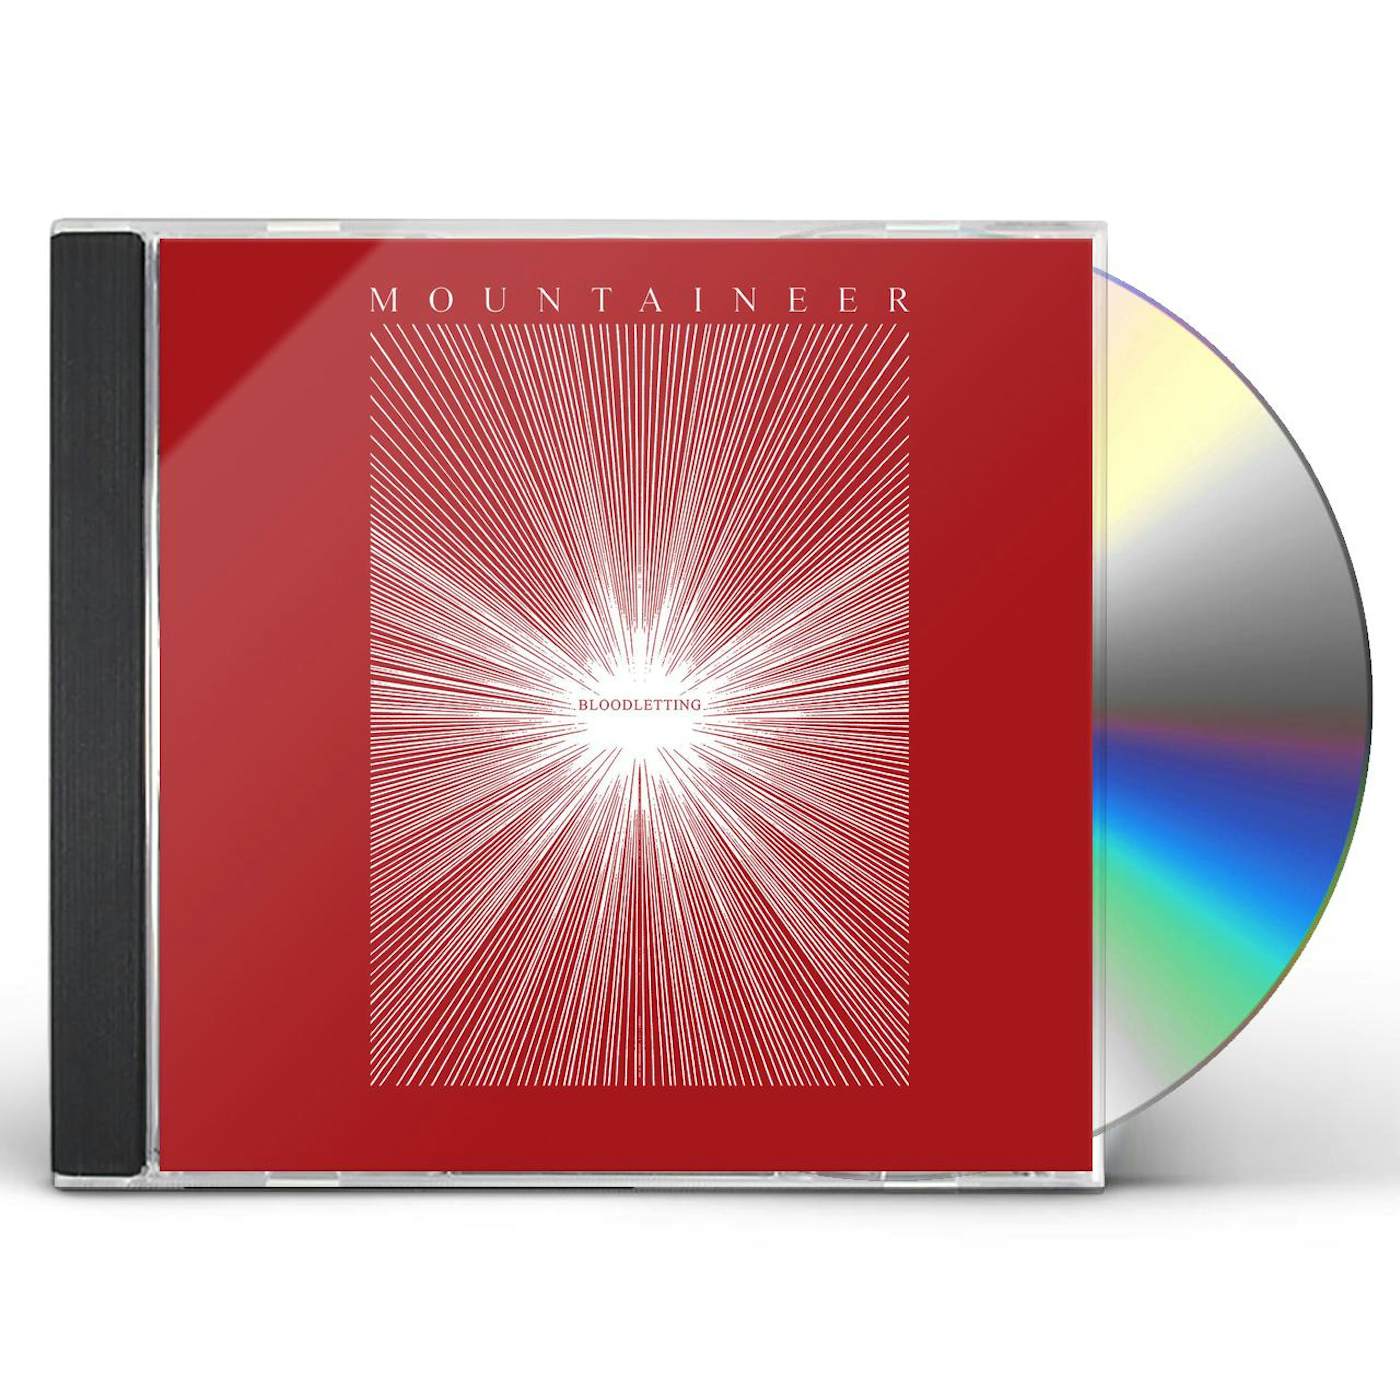 Mountaineer BLOODLETTING CD